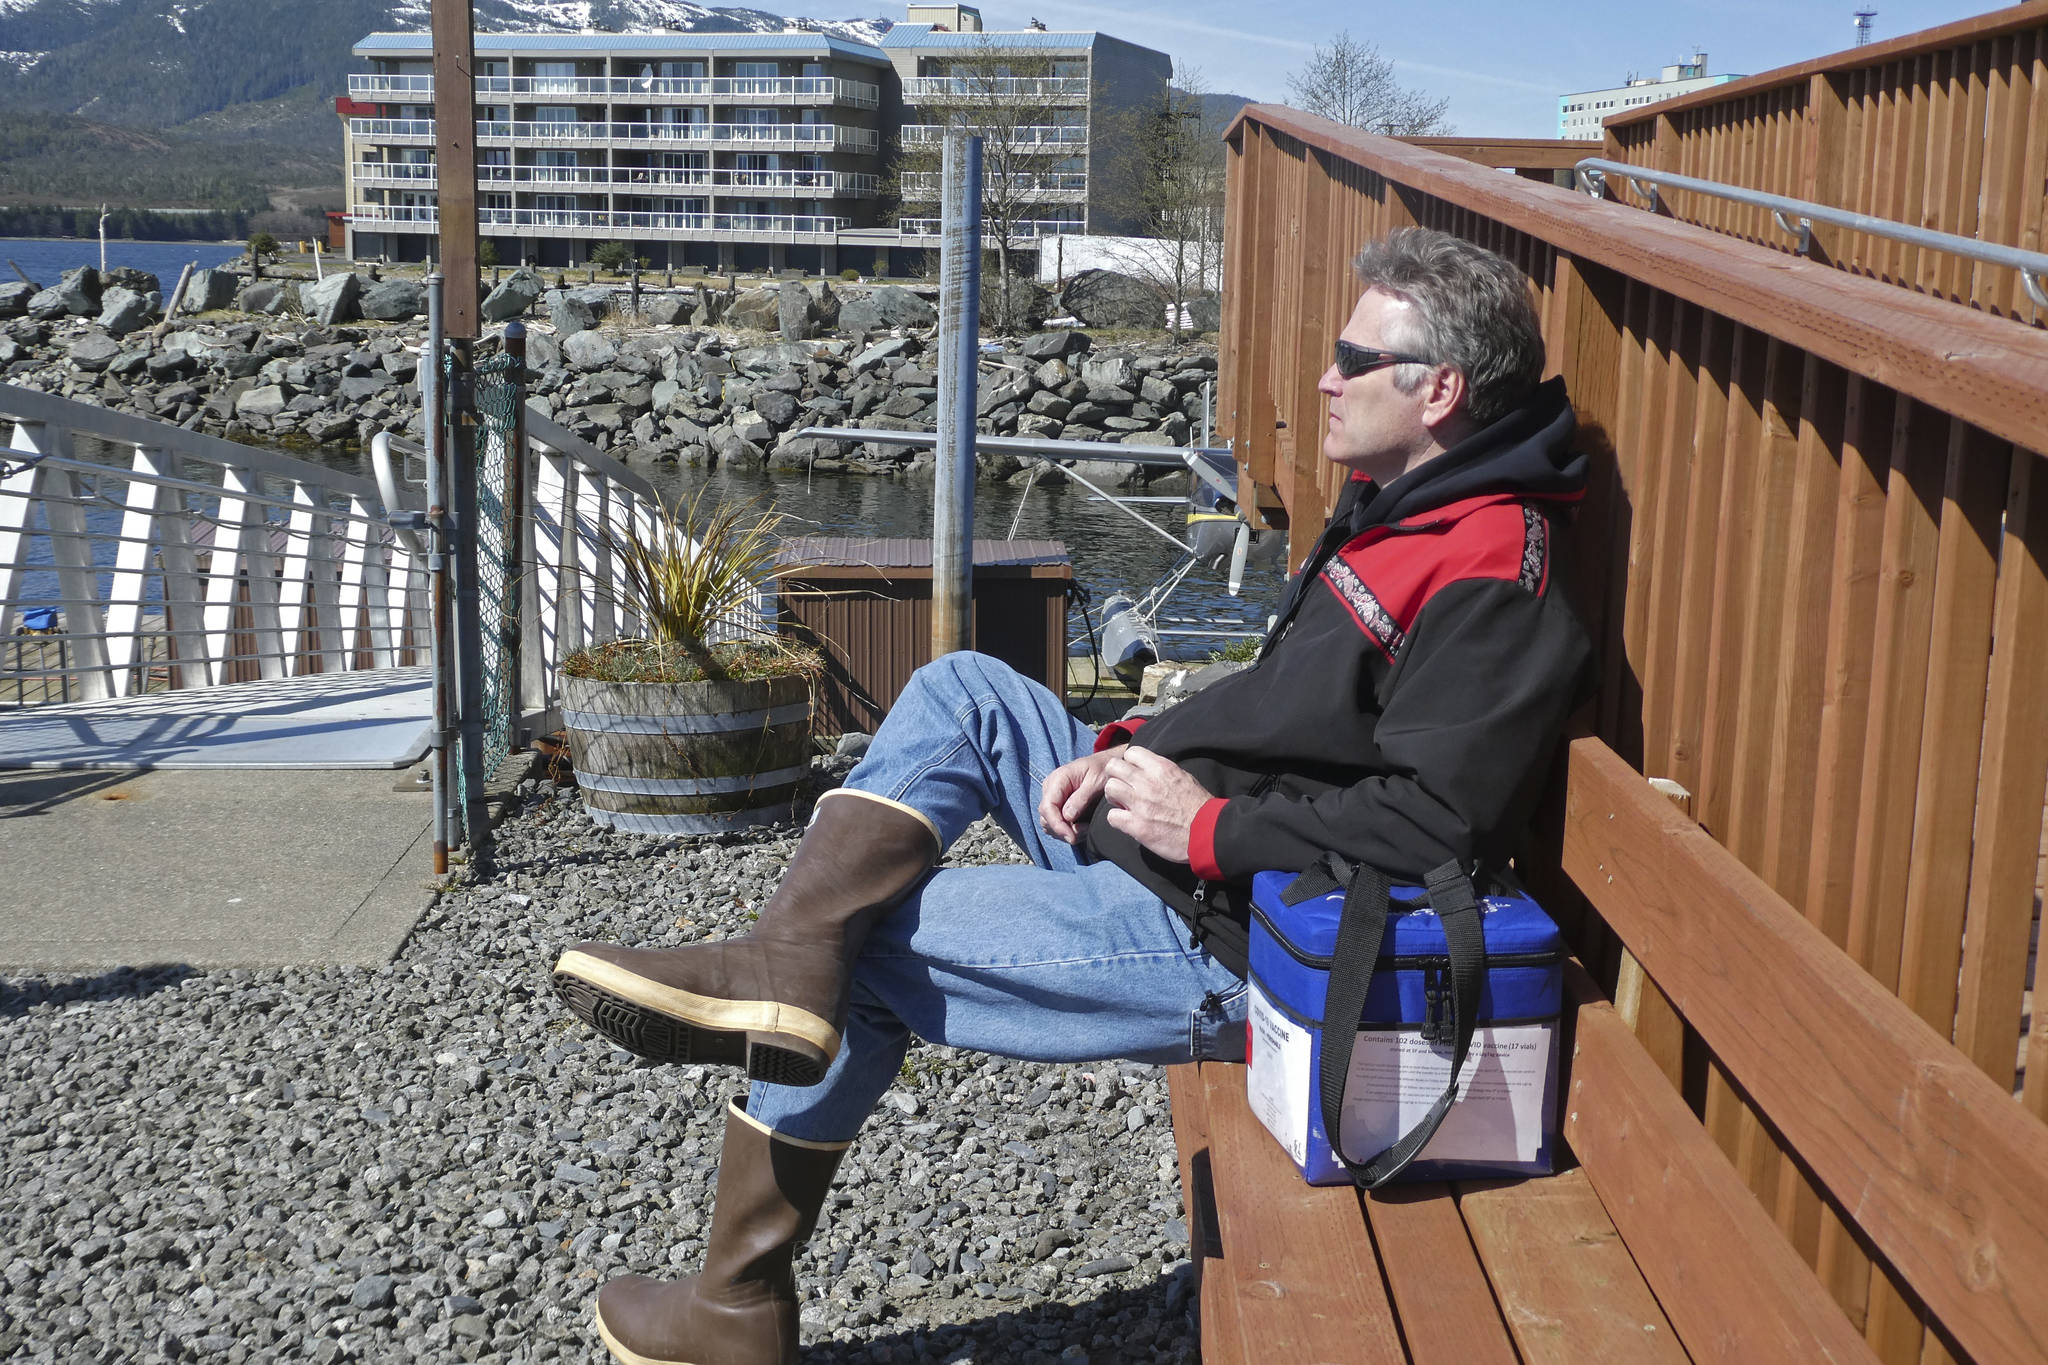 Gov. Mike Dunleavy sits beside a case containing COVID-19 vaccine doses as he waits near a floatplane dock on Thursday, April 22, 2021, in Ketchikan, Alaska. State health officials have said Alaska has an ample supply of COVID-19 vaccines, and Dunleavy, who flew from Ketchikan to Hyder, Alaska, said he wanted to offer vaccines not only to residents of Hyder but also to Canadians across the border from Hyder in Stewart, British Columbia. (AP Photo/Becky Bohrer)